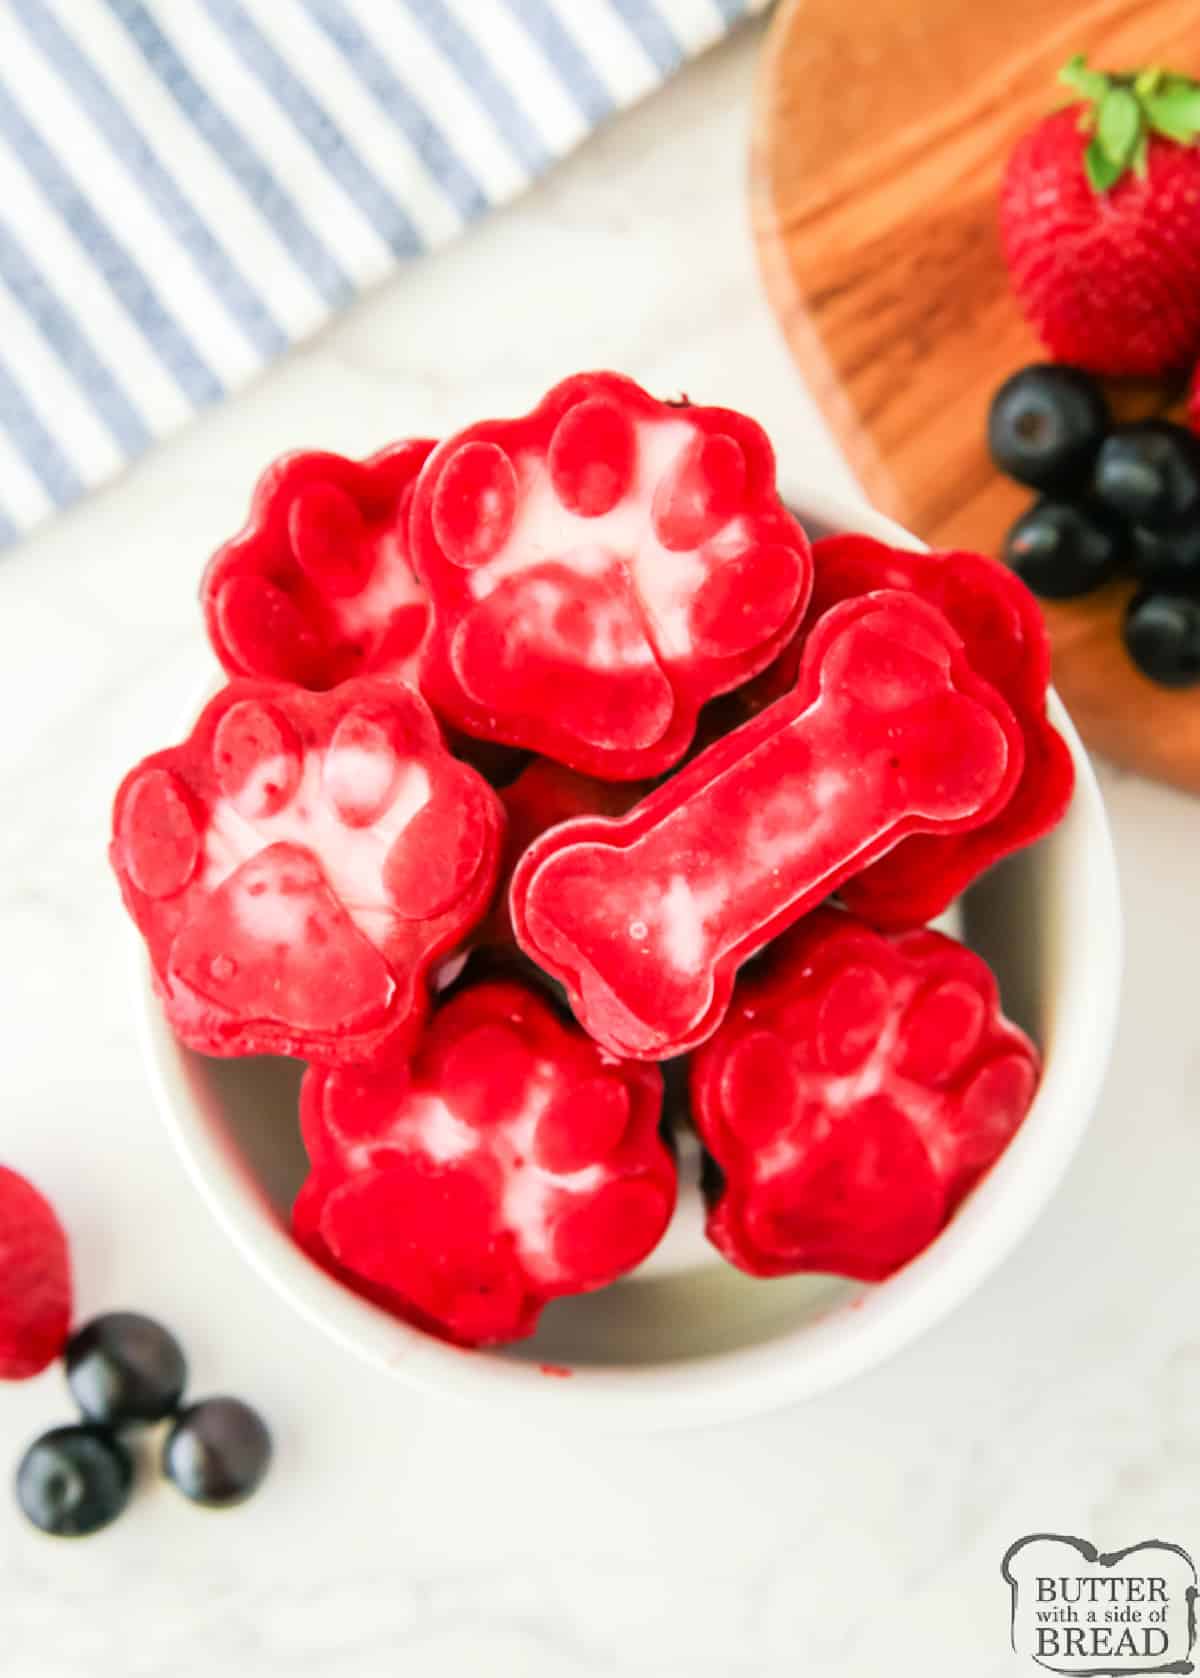 Mixed Berry Frozen Dog Treats are made with 3 simple ingredients and they are so refreshing for summer! Healthy dog treats are made with strawberries, blueberries, and Greek yogurt. 